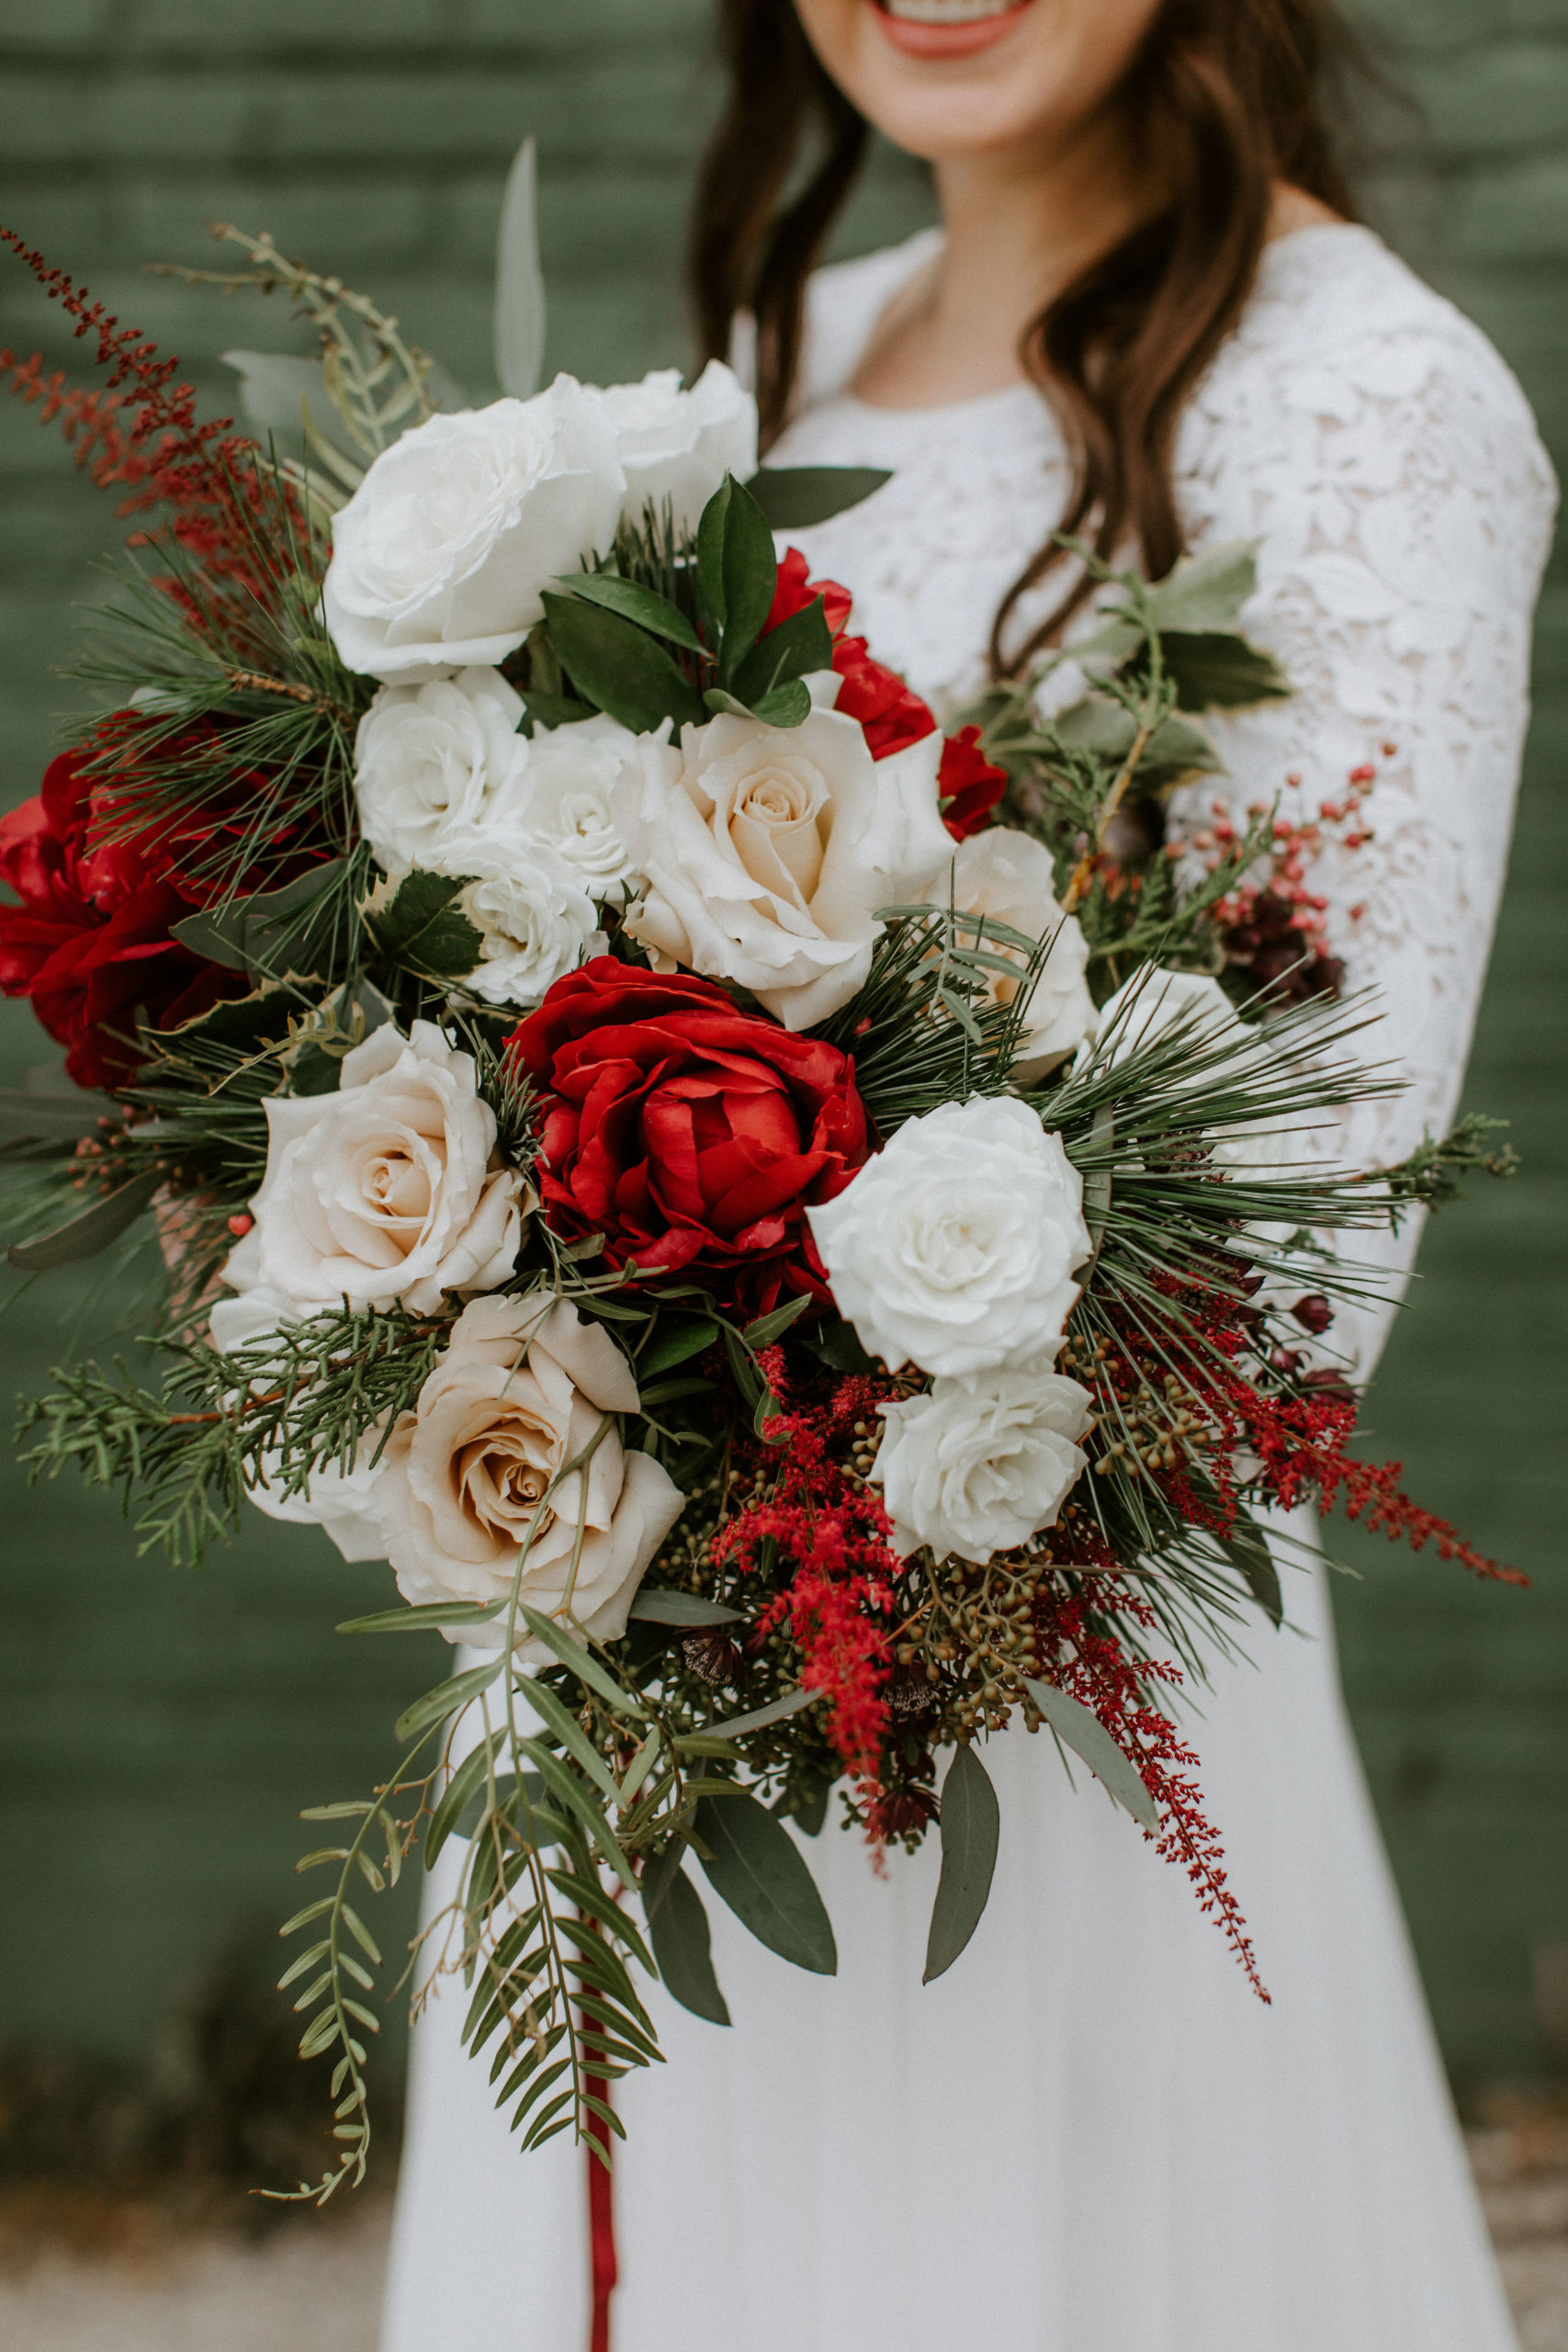 Hannah & Hayden's Winter Wedding at The Ivy House. Deep burgundy hues, winter whites, and an evergreen ceremony backdrop brought together Hannah & Hayden's Winter Wedding at The Ivy House...